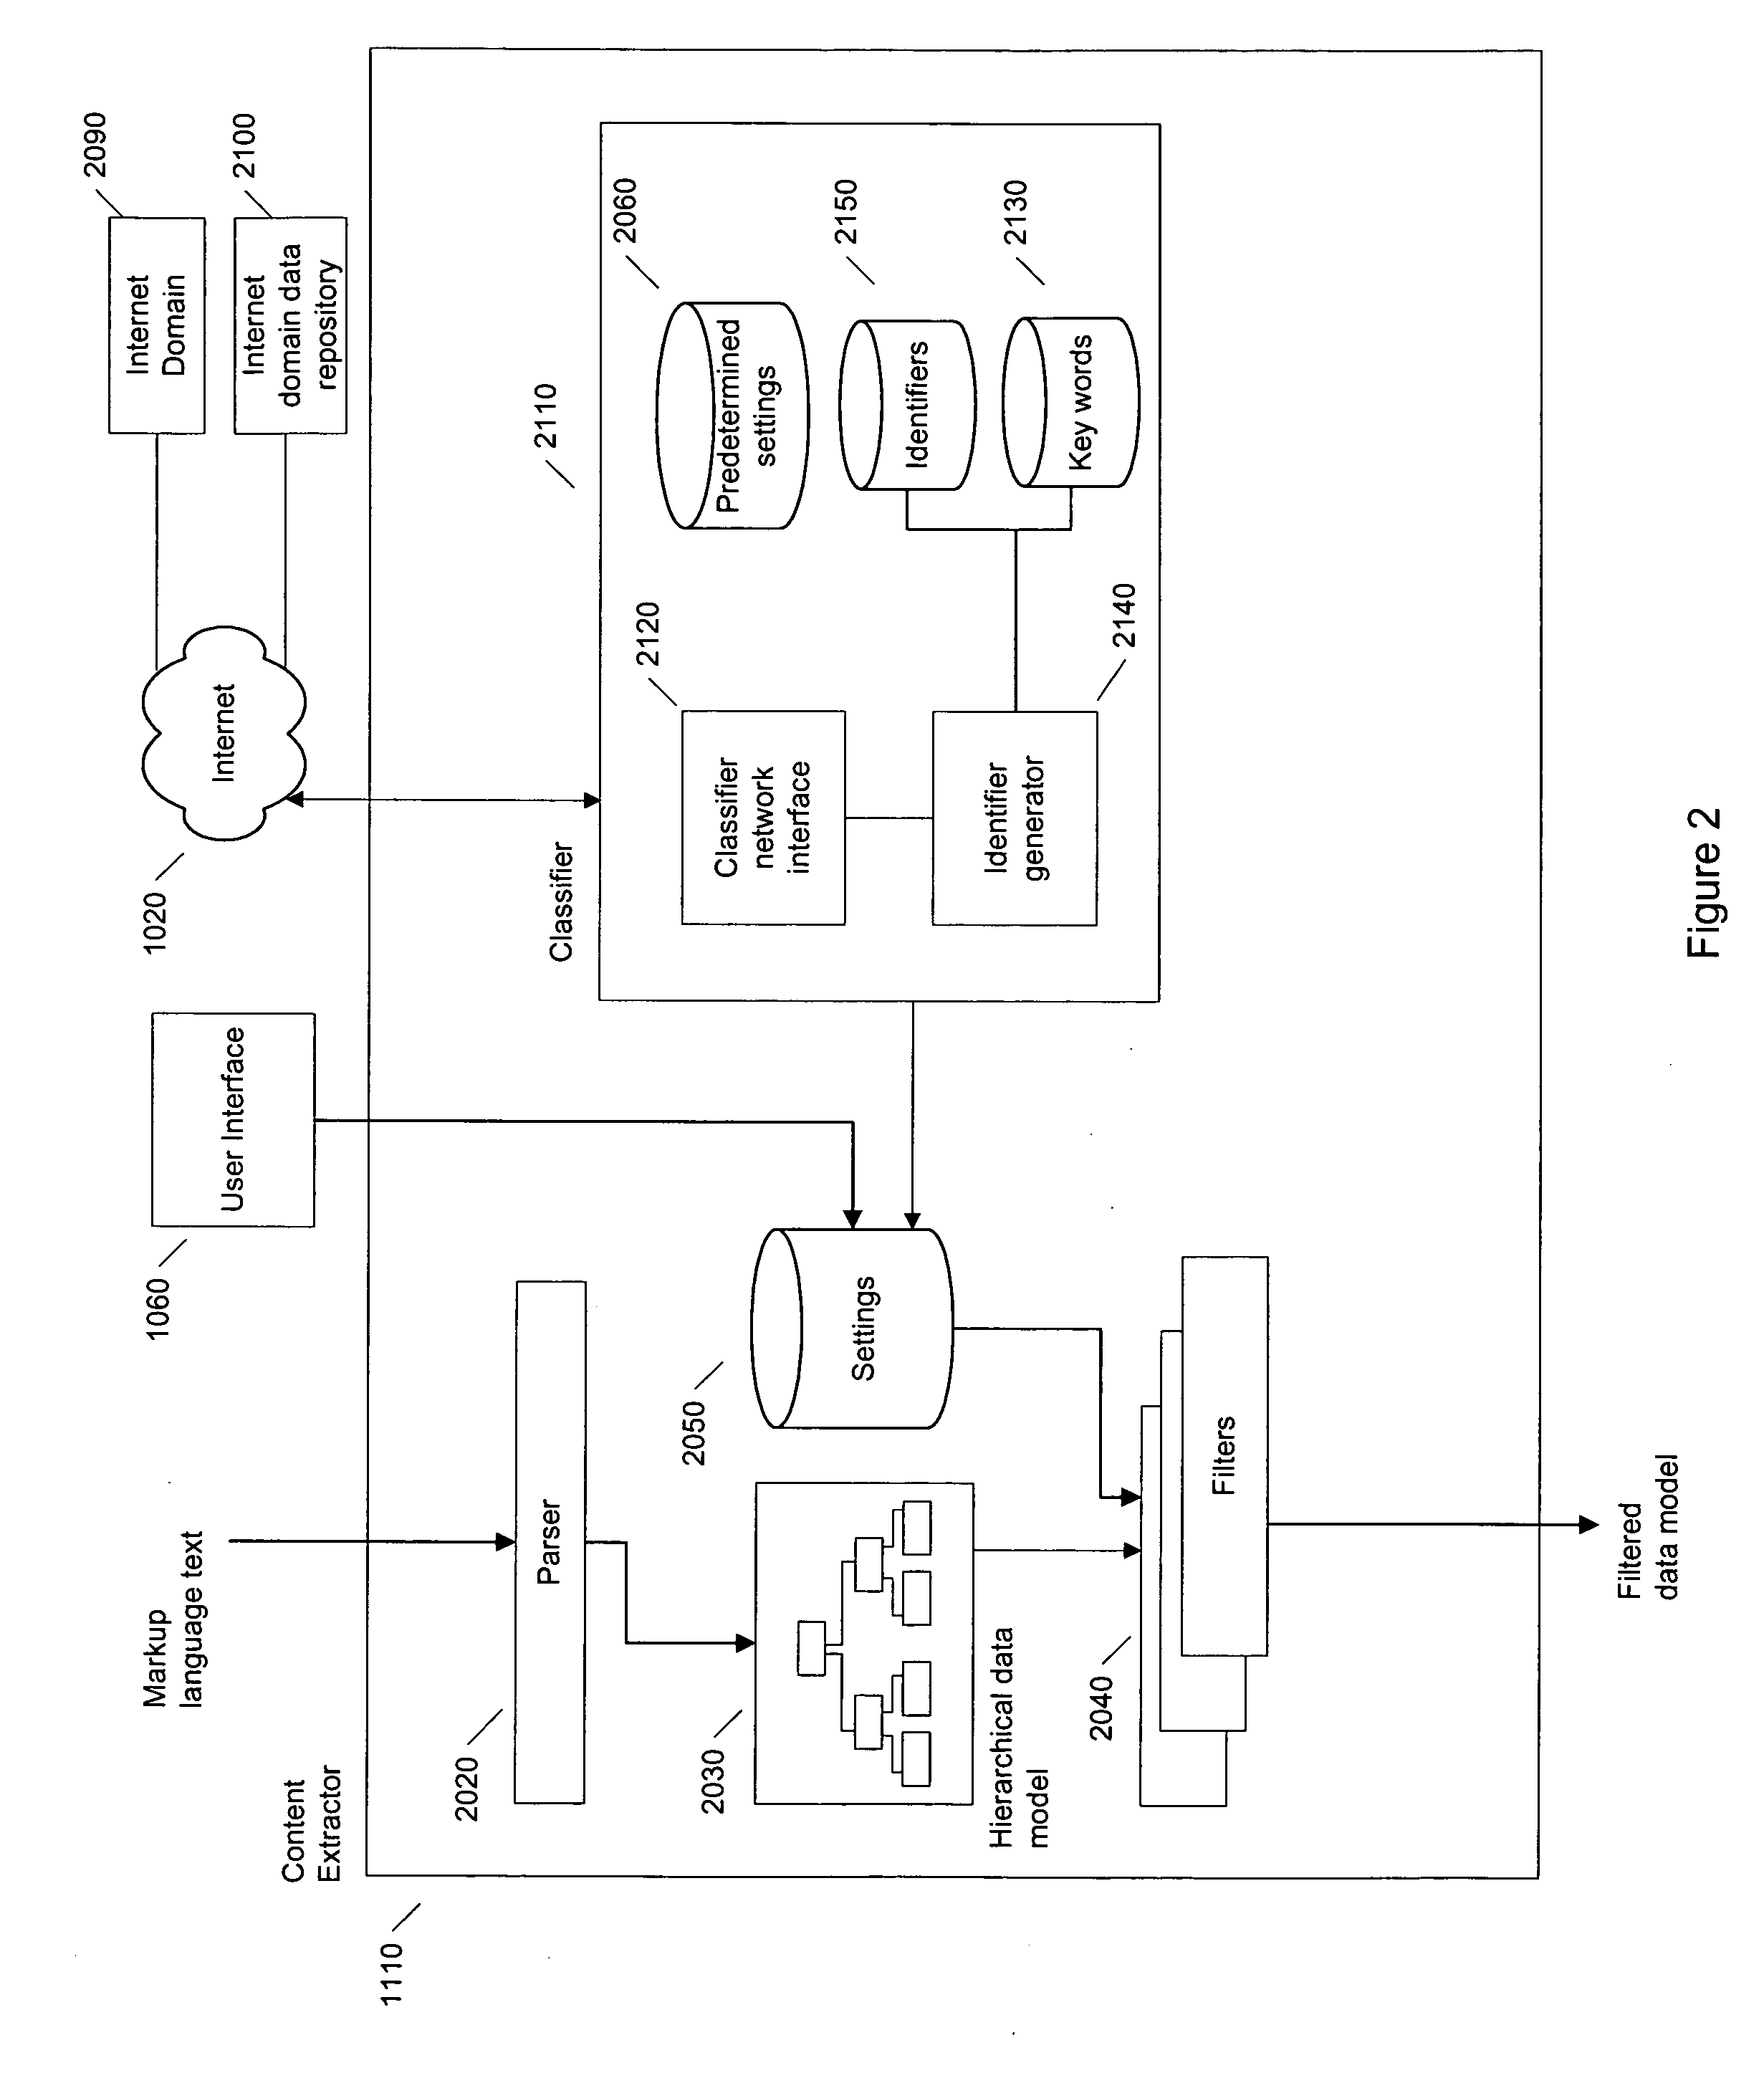 Systems and methods for content extraction